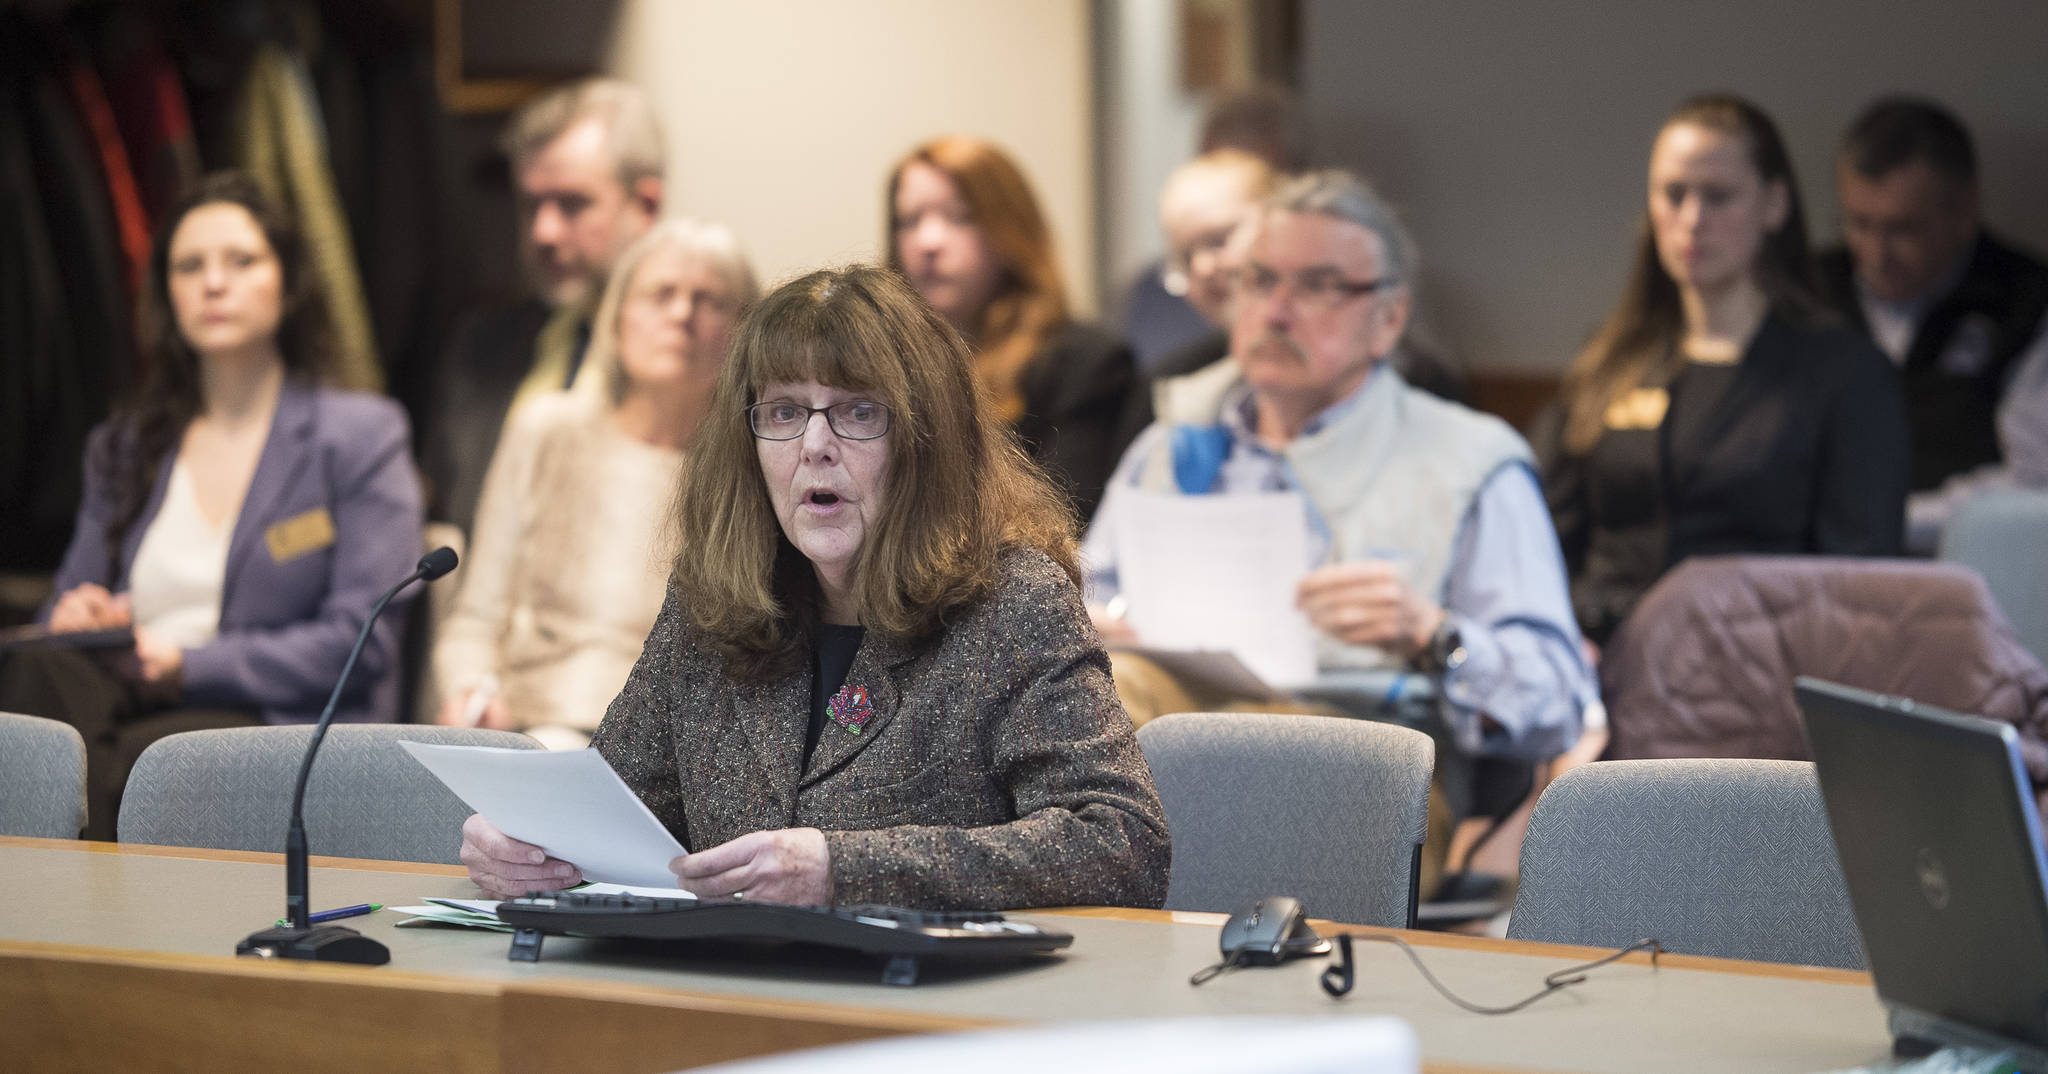 Elaine Schroeder speaks to the Board of Trustees of the Alaska Permanent Fund Corporation on divesting from fossil fuel investments during public testimony at its Quarterly Meeting in Juneau on Wednesday, Feb. 21, 2018.